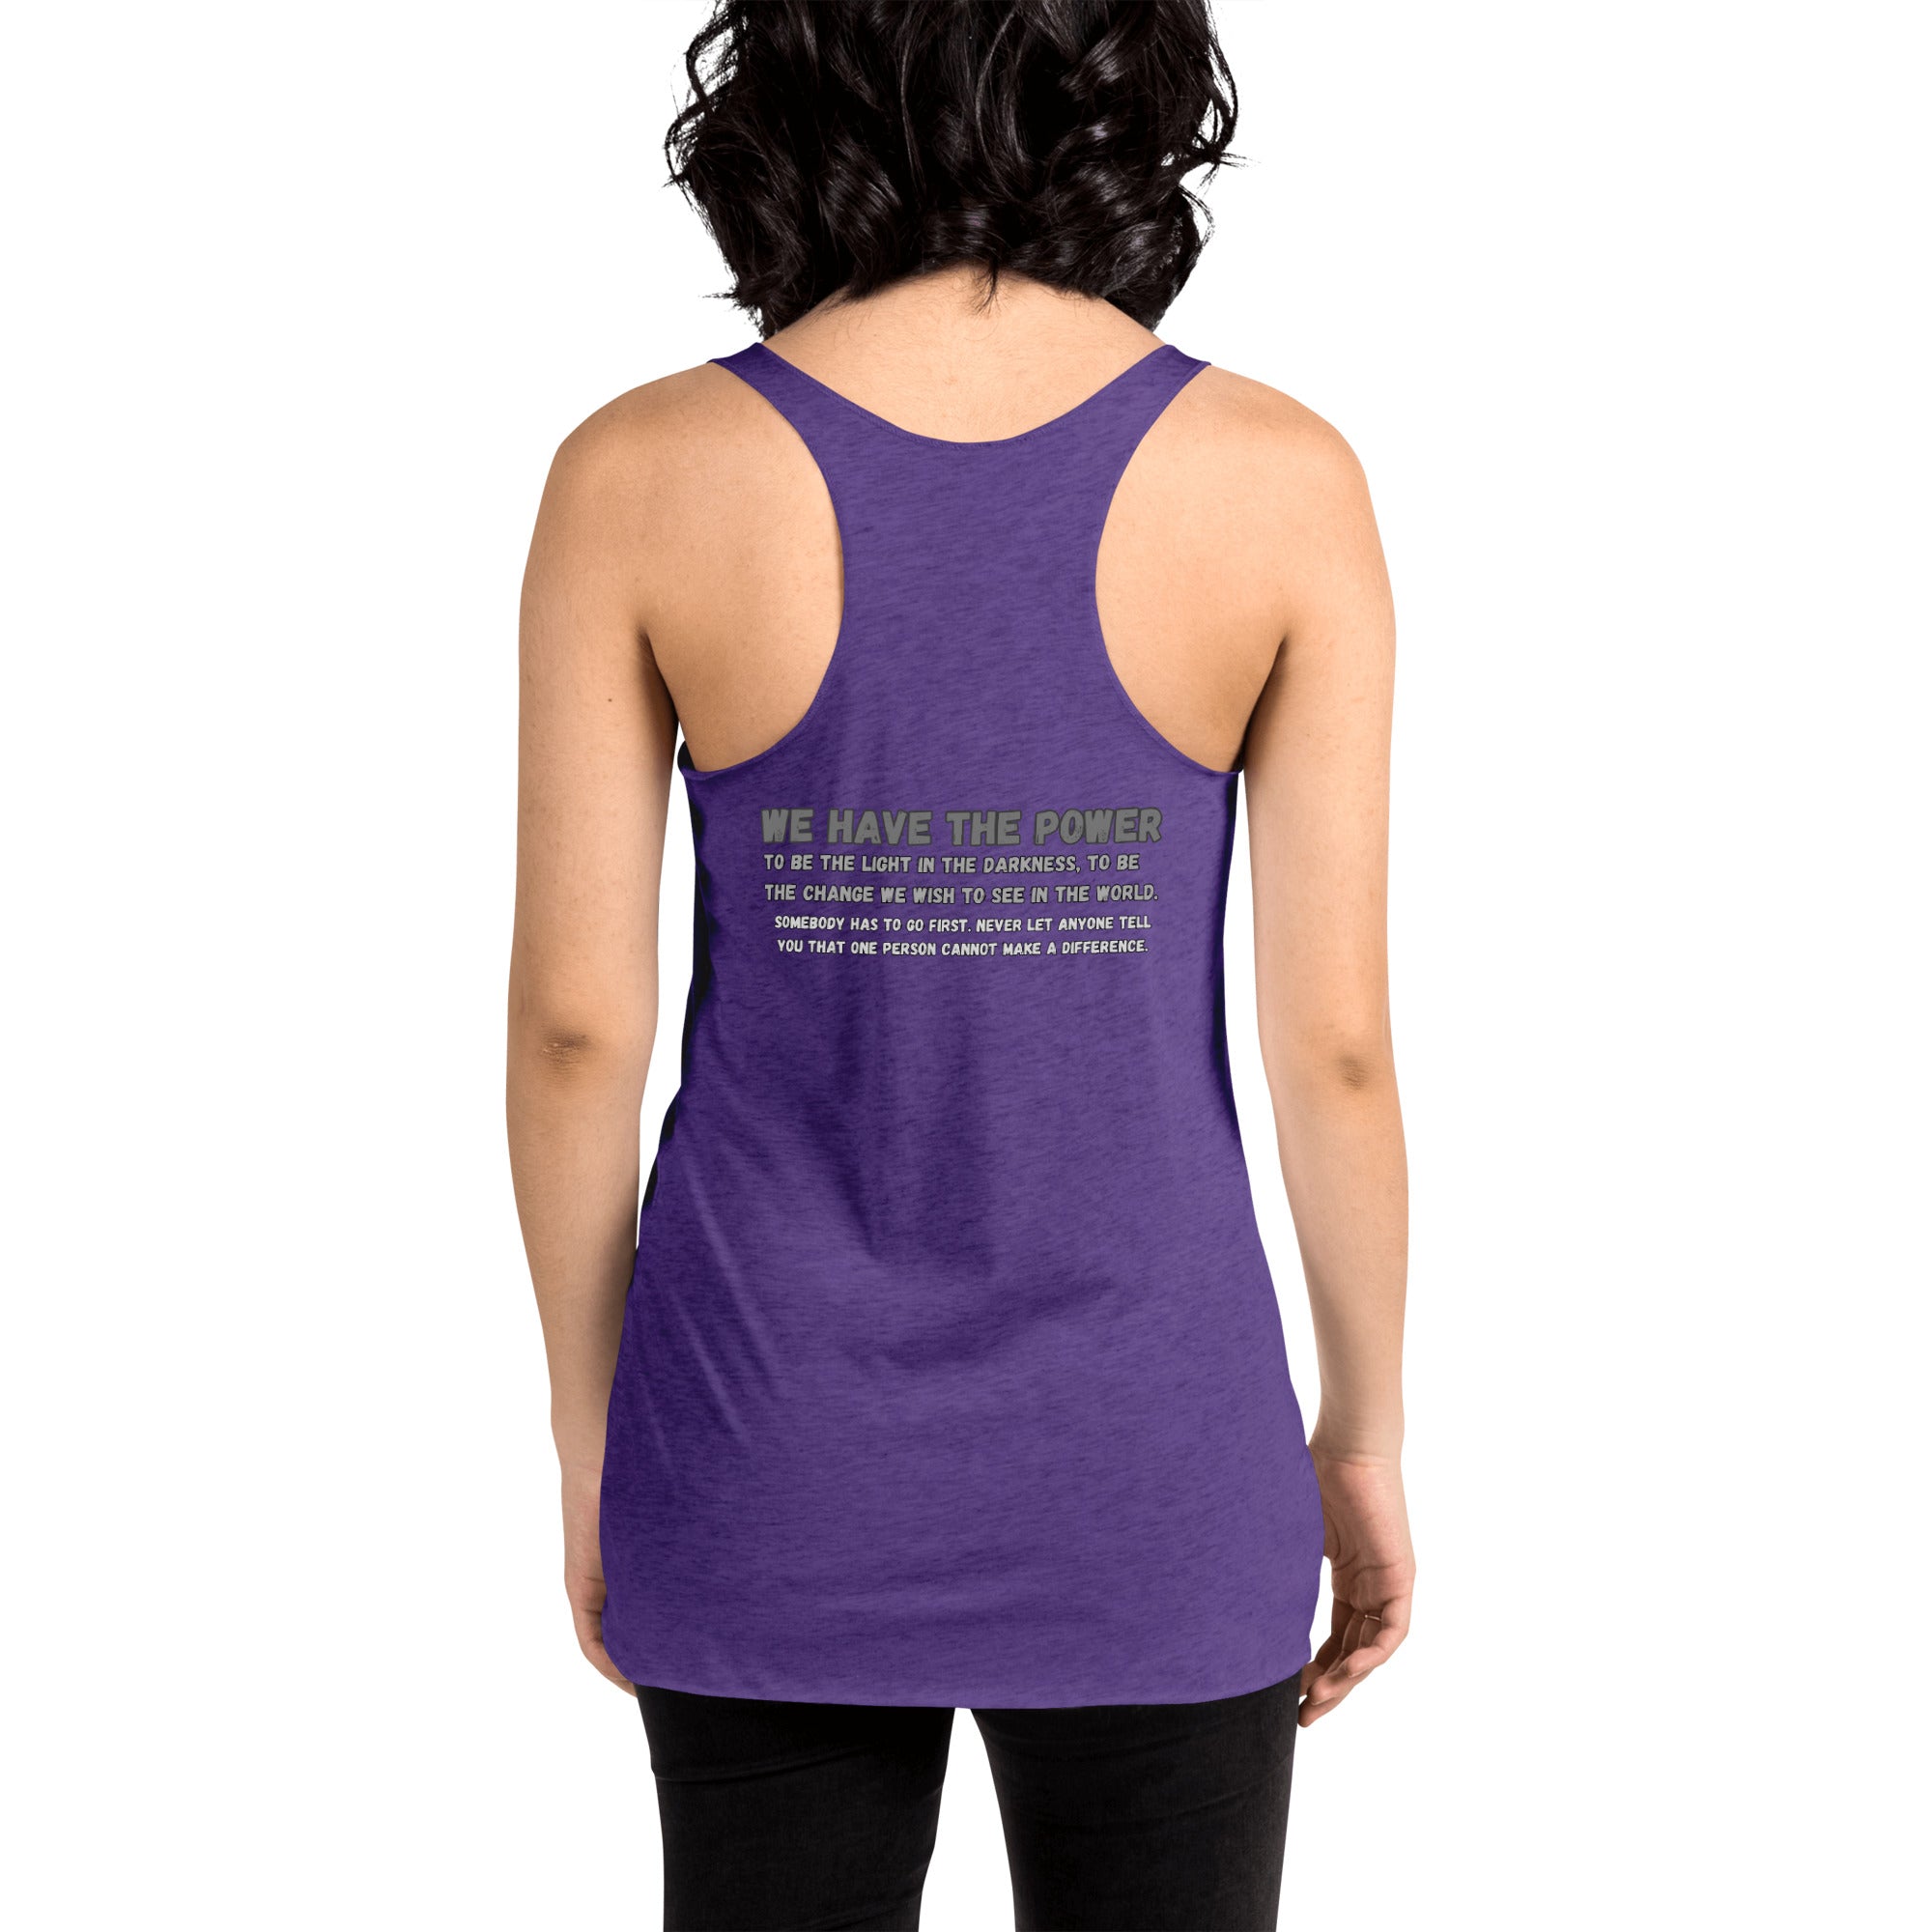 We have the power-Women's Racerback Tank